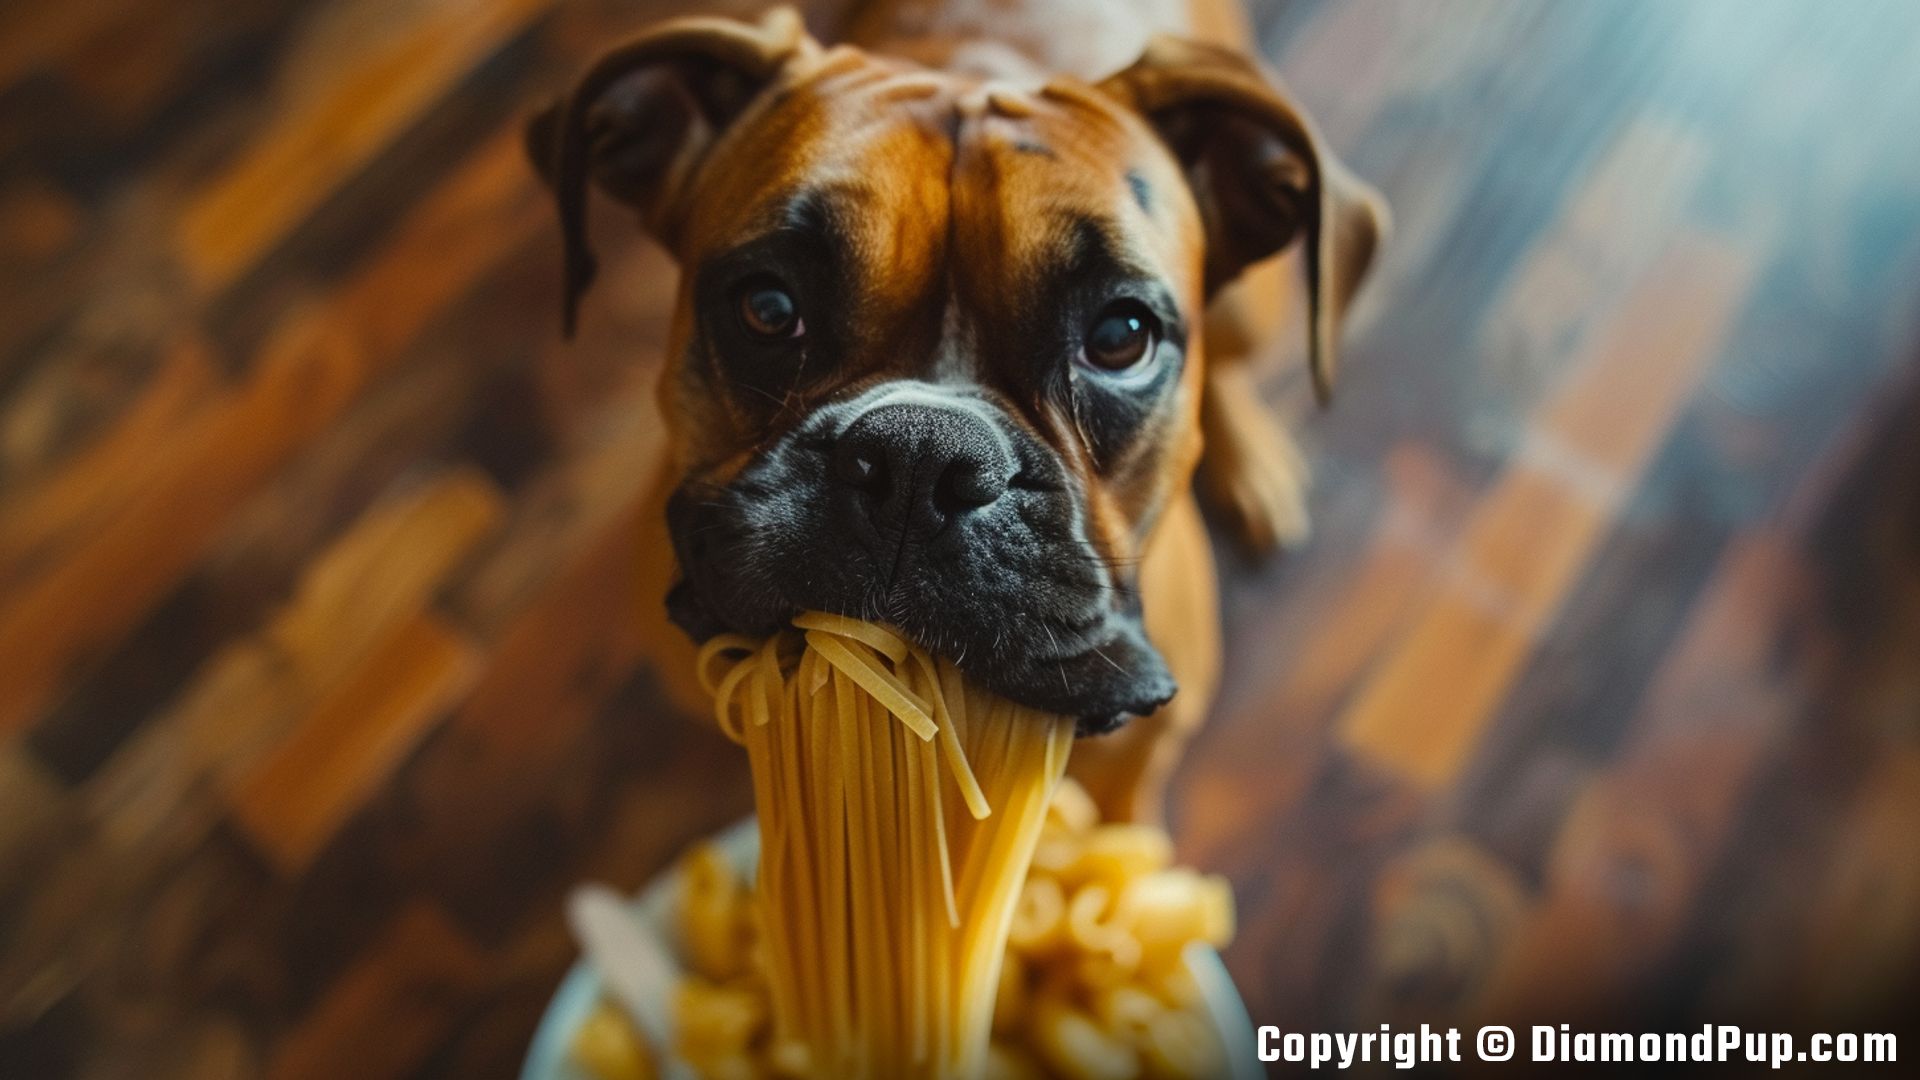 Image of an Adorable Boxer Eating Pasta